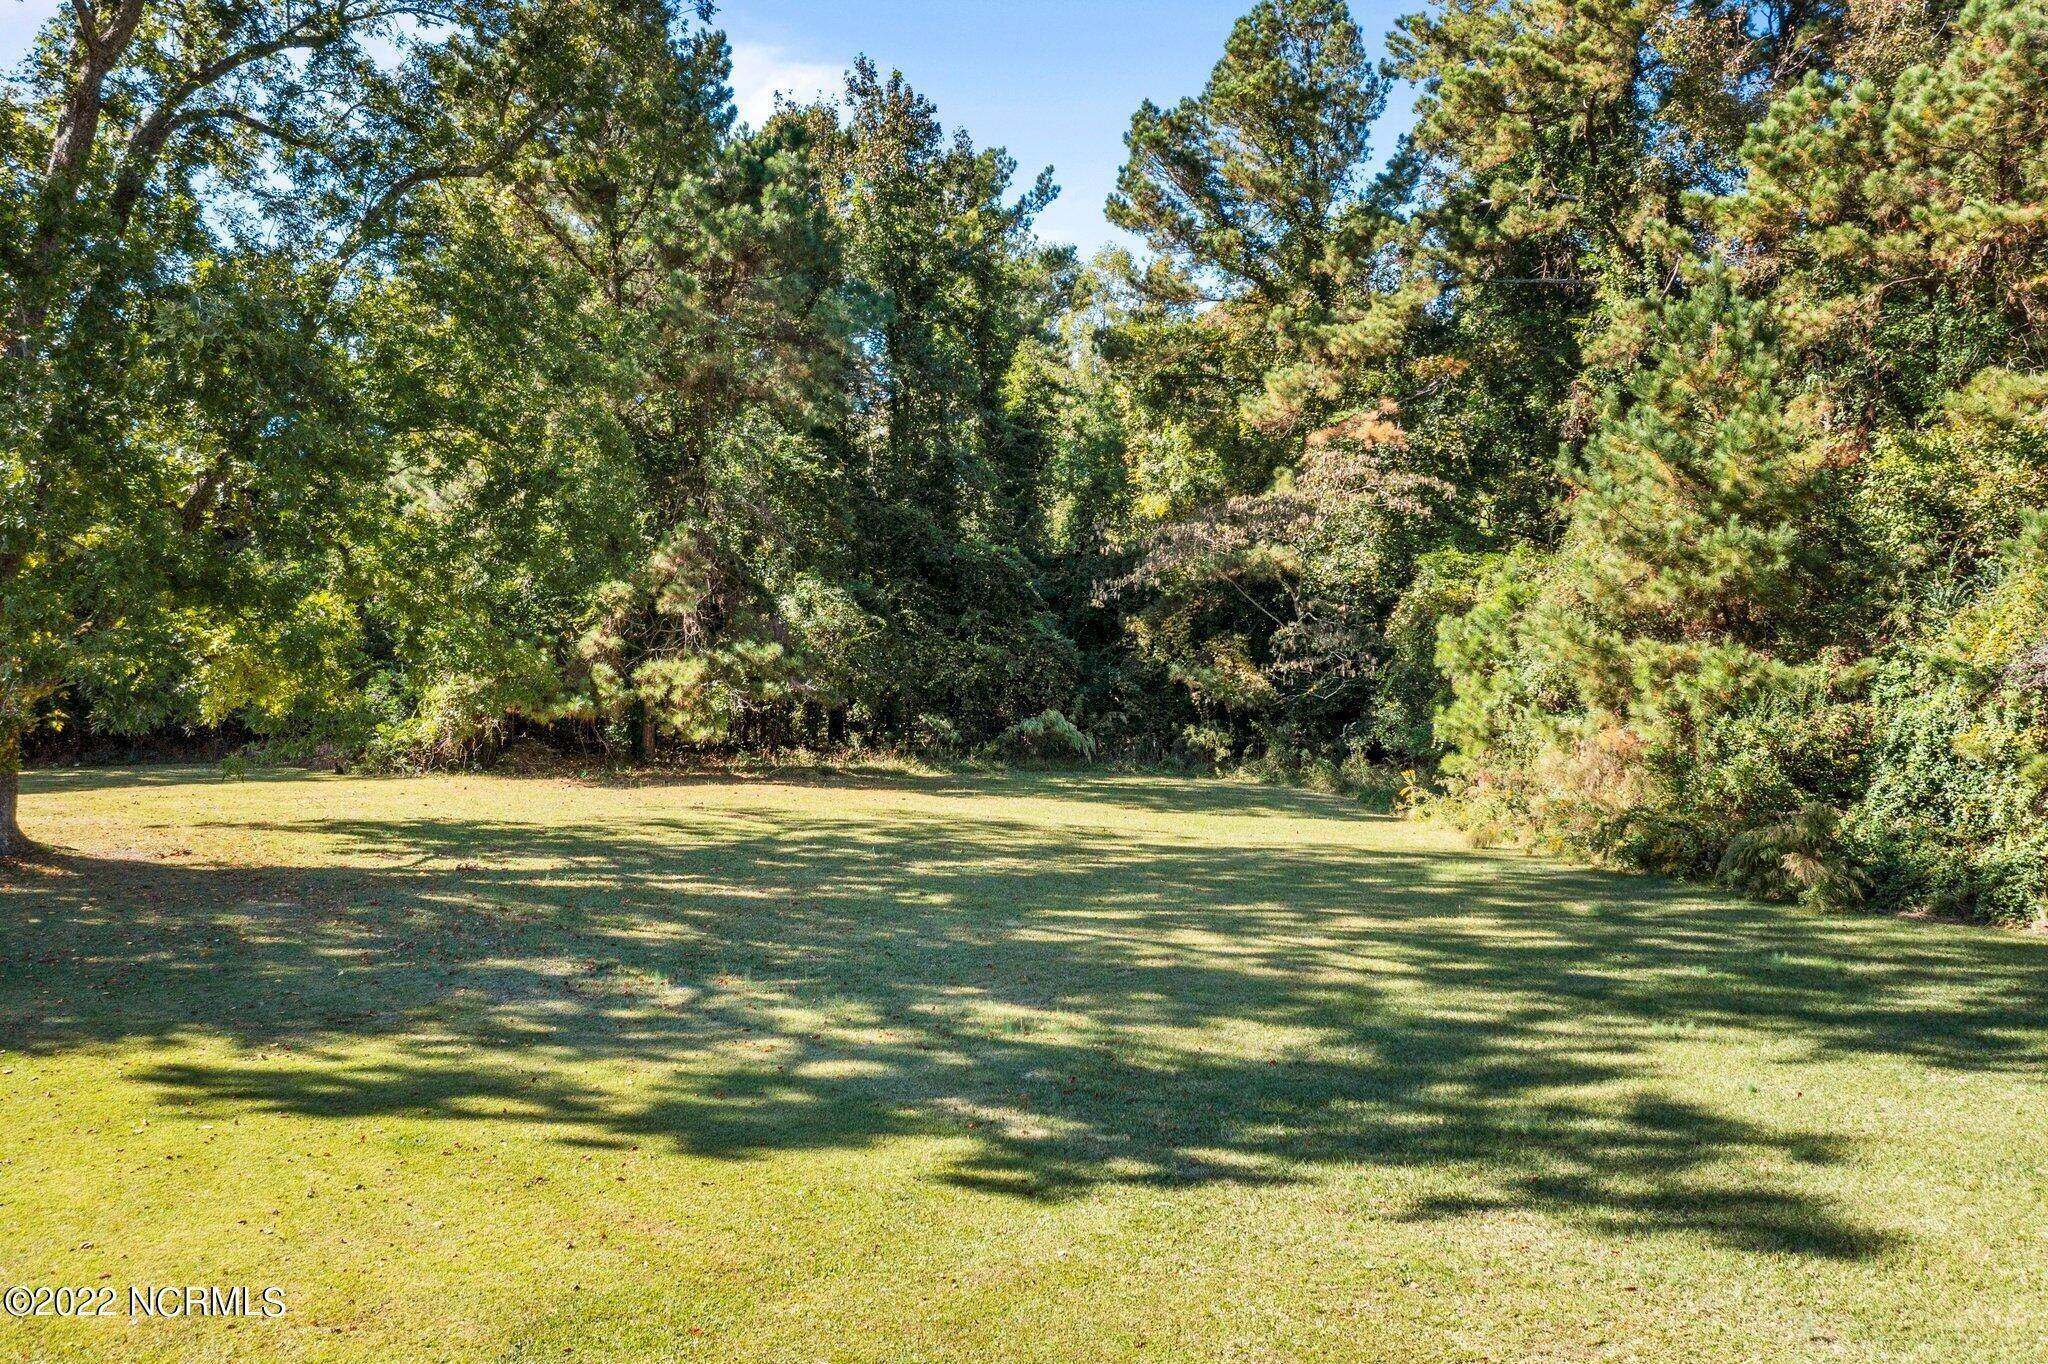 4. Land for Sale at Greenville, NC 27858